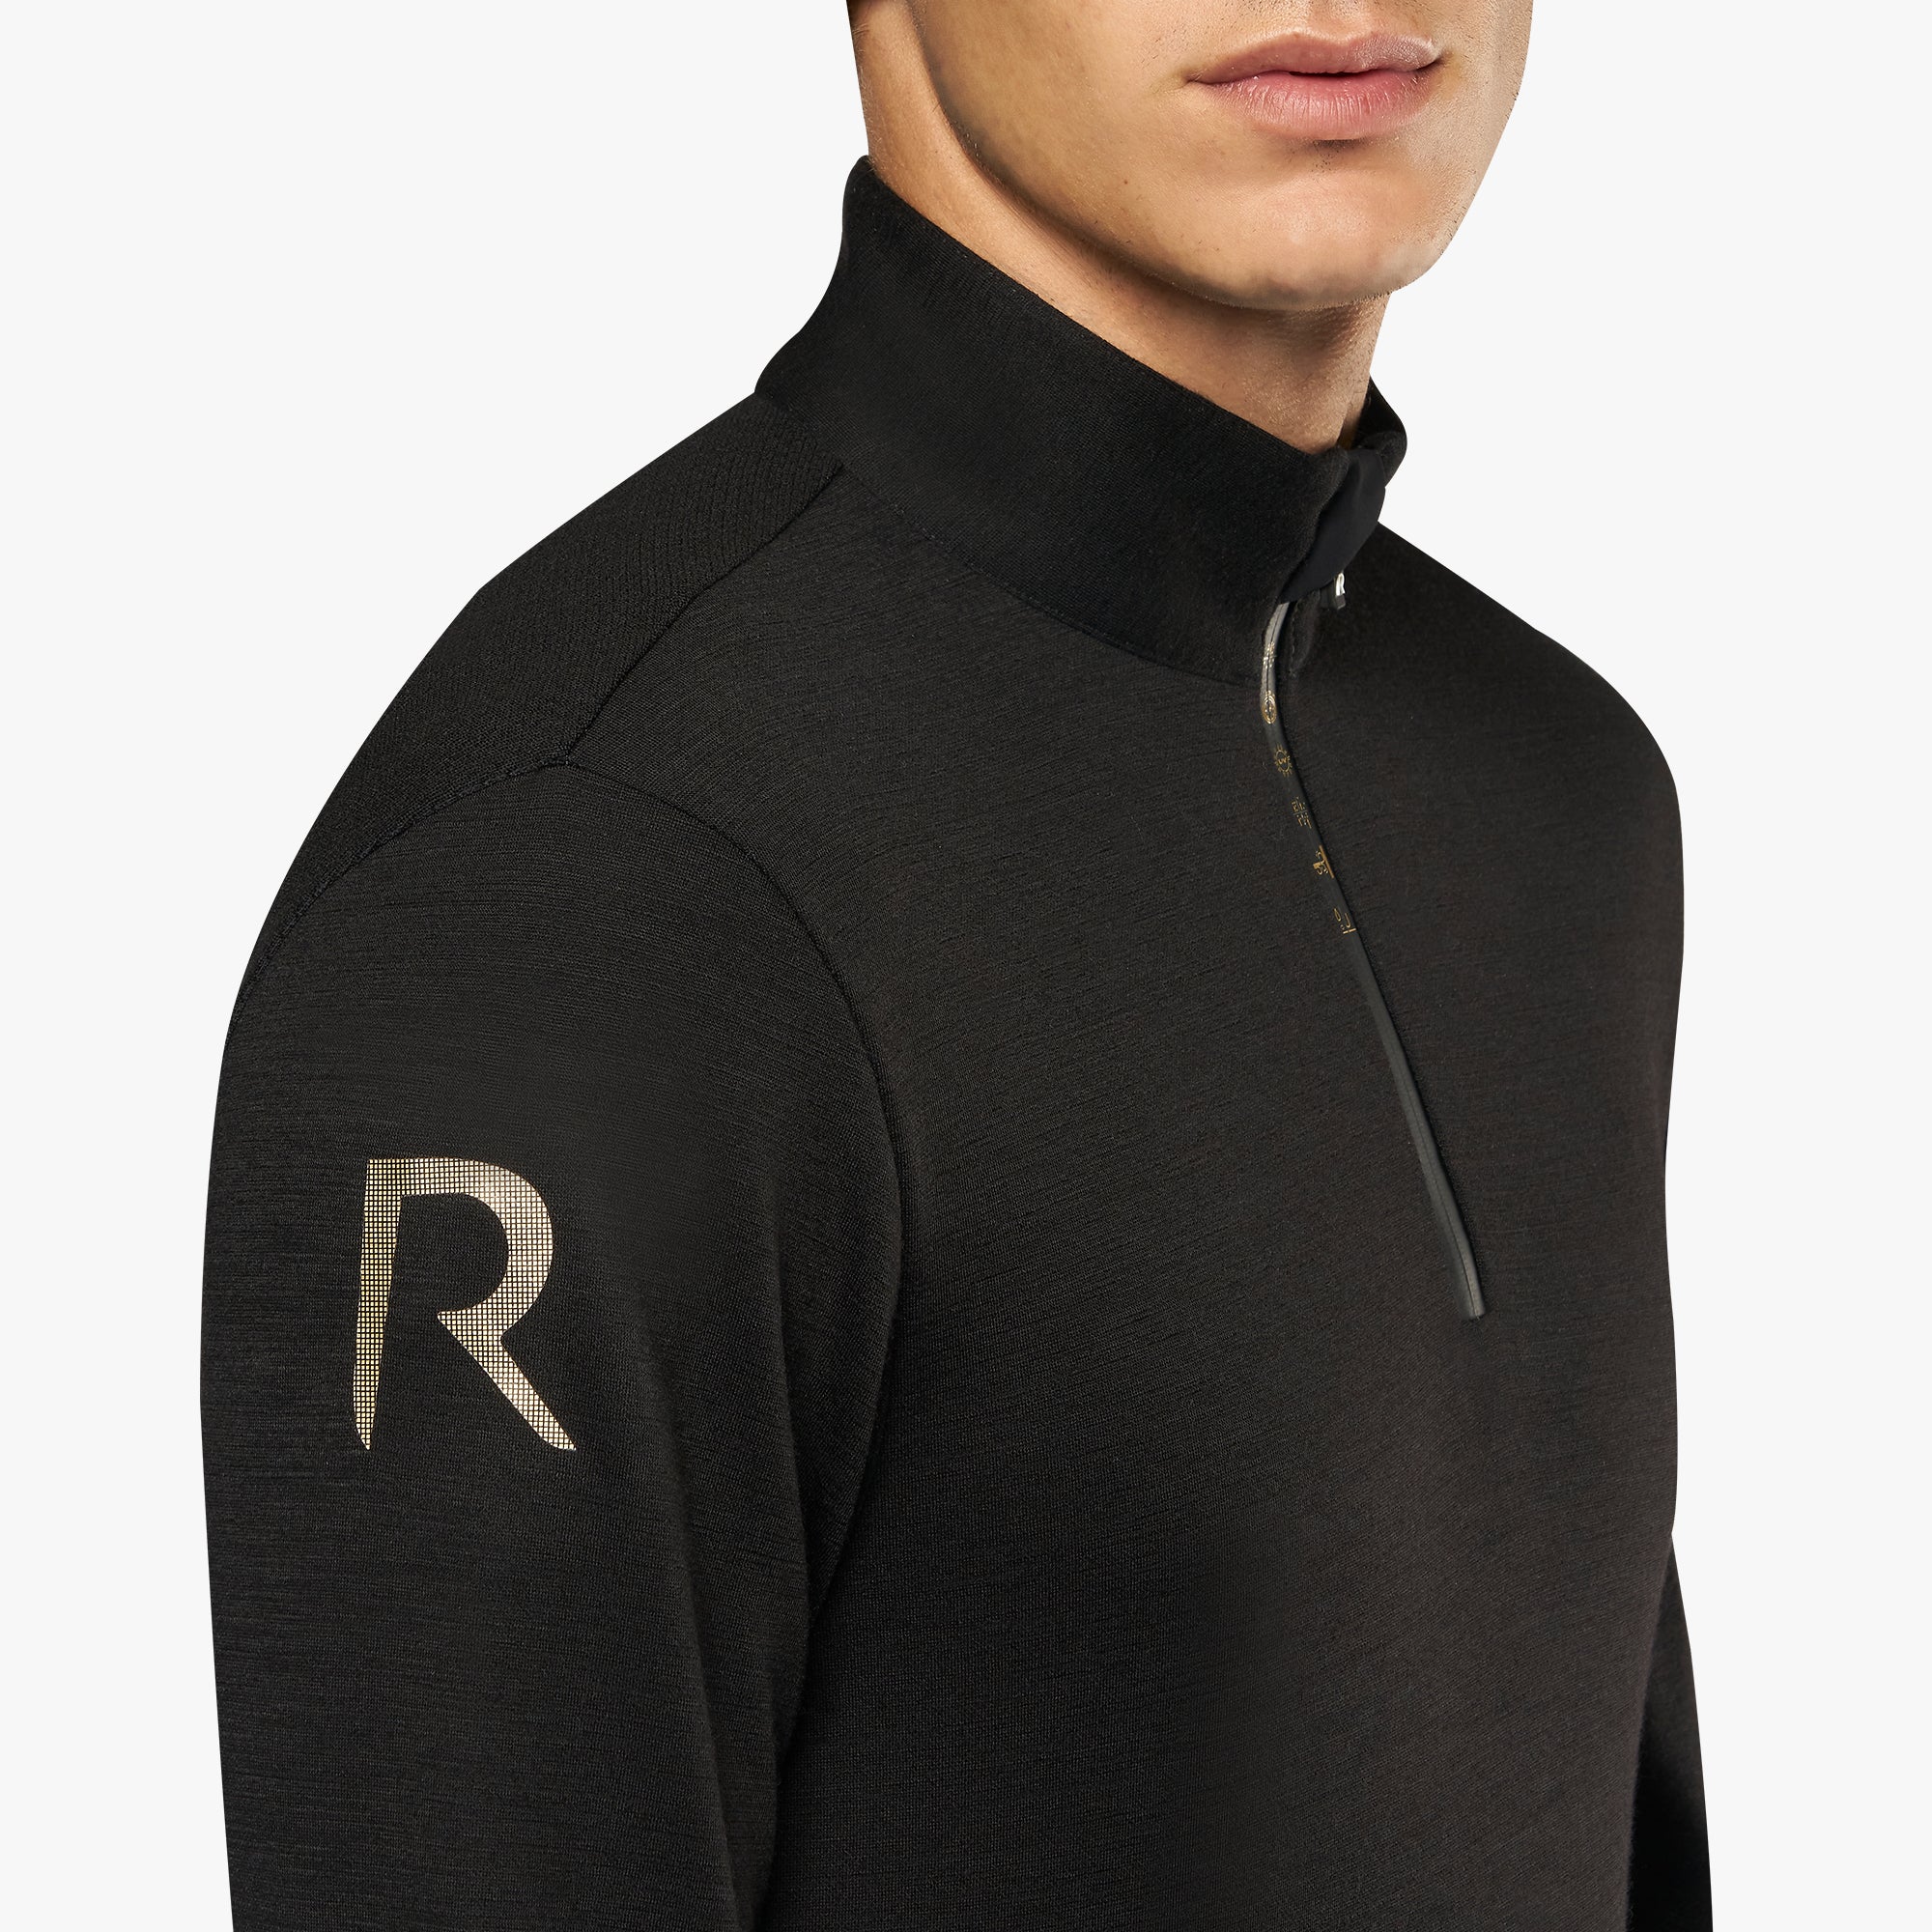 R-EVO EPAULET LONG SLEEVES ZIP COMPETITION POLO